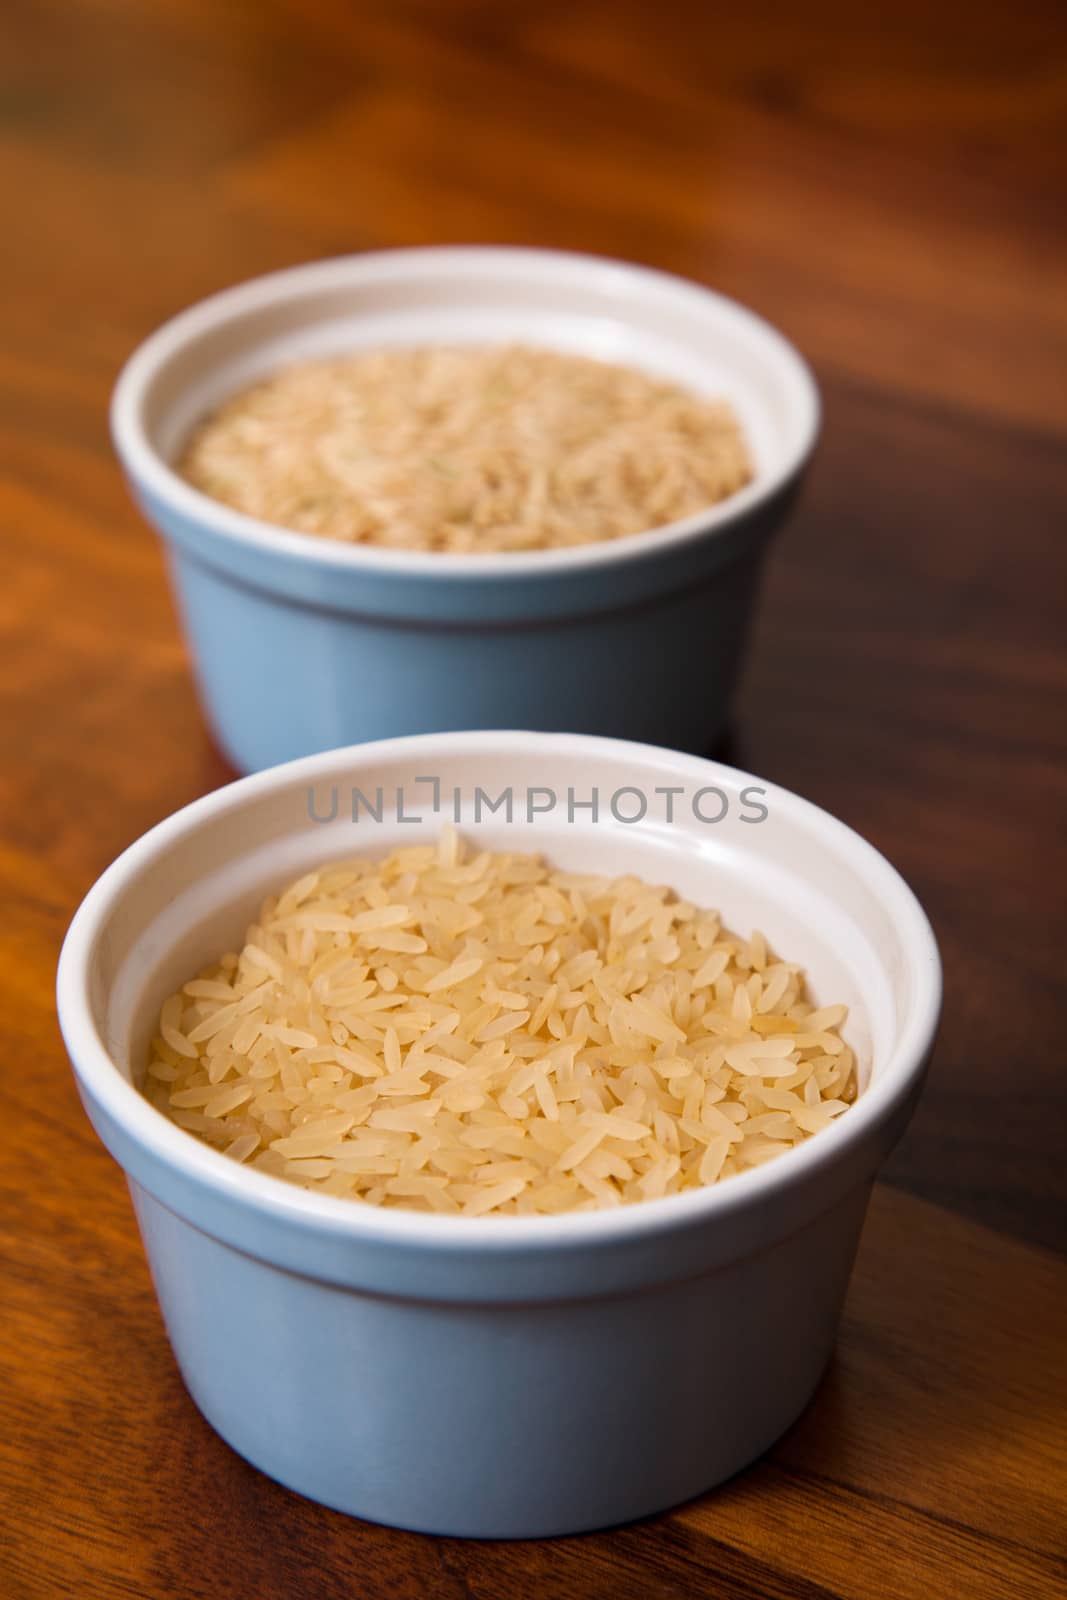 Shallow depth of field so rice in the background will be blurred